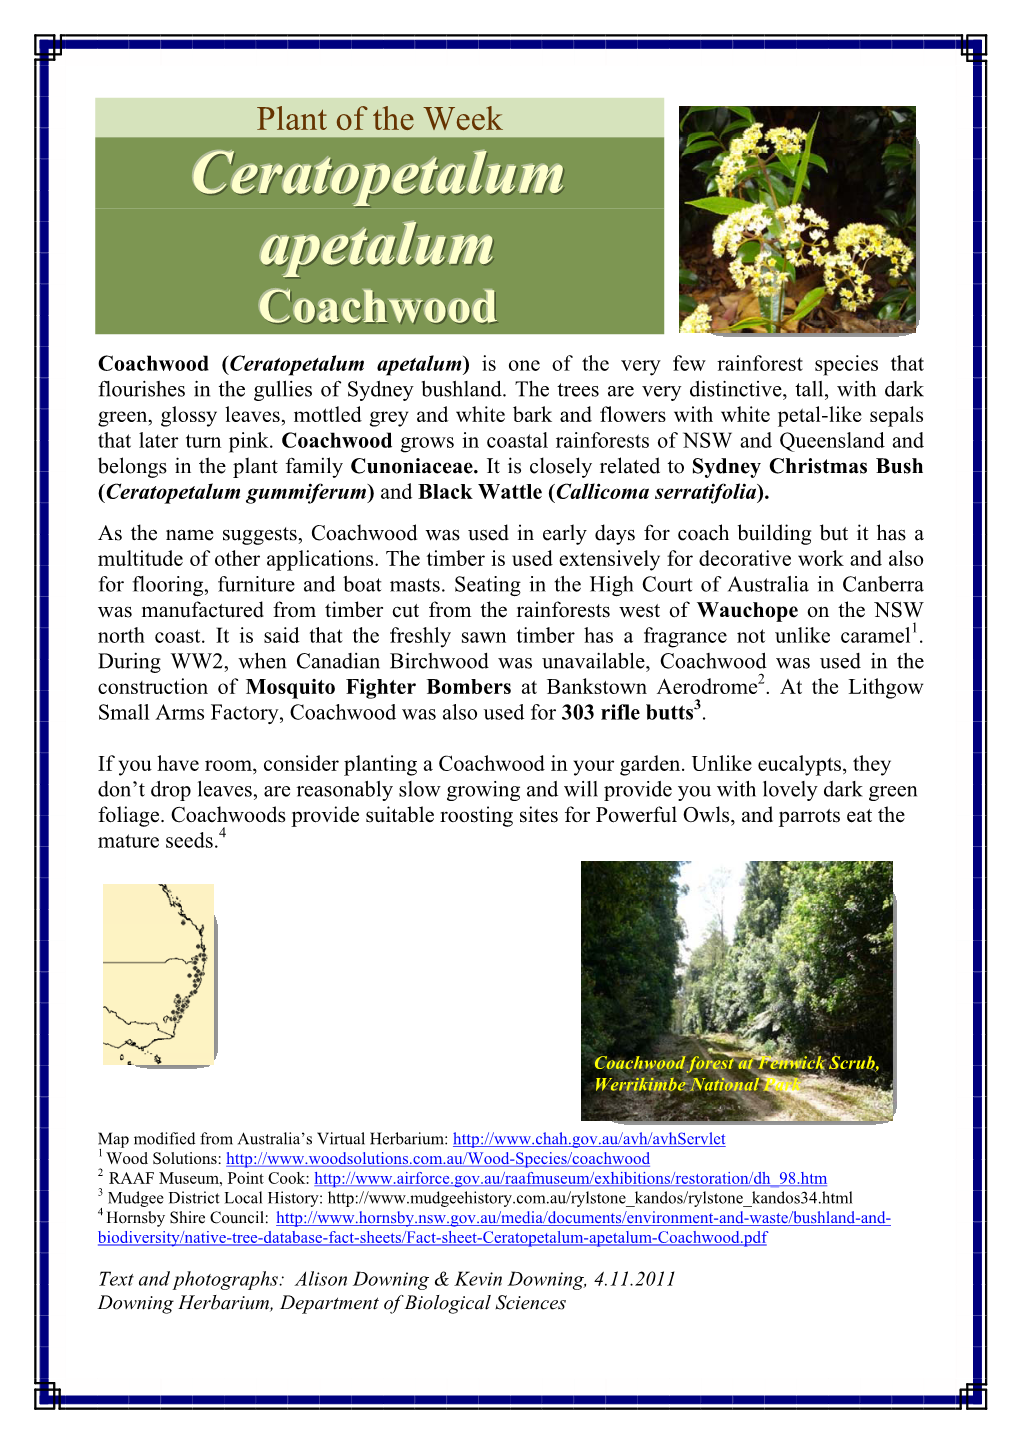 Ceratopetalum Apetalum) Is One of the Very Few Rainforest Species That Flourishes in the Gullies of Sydney Bushland